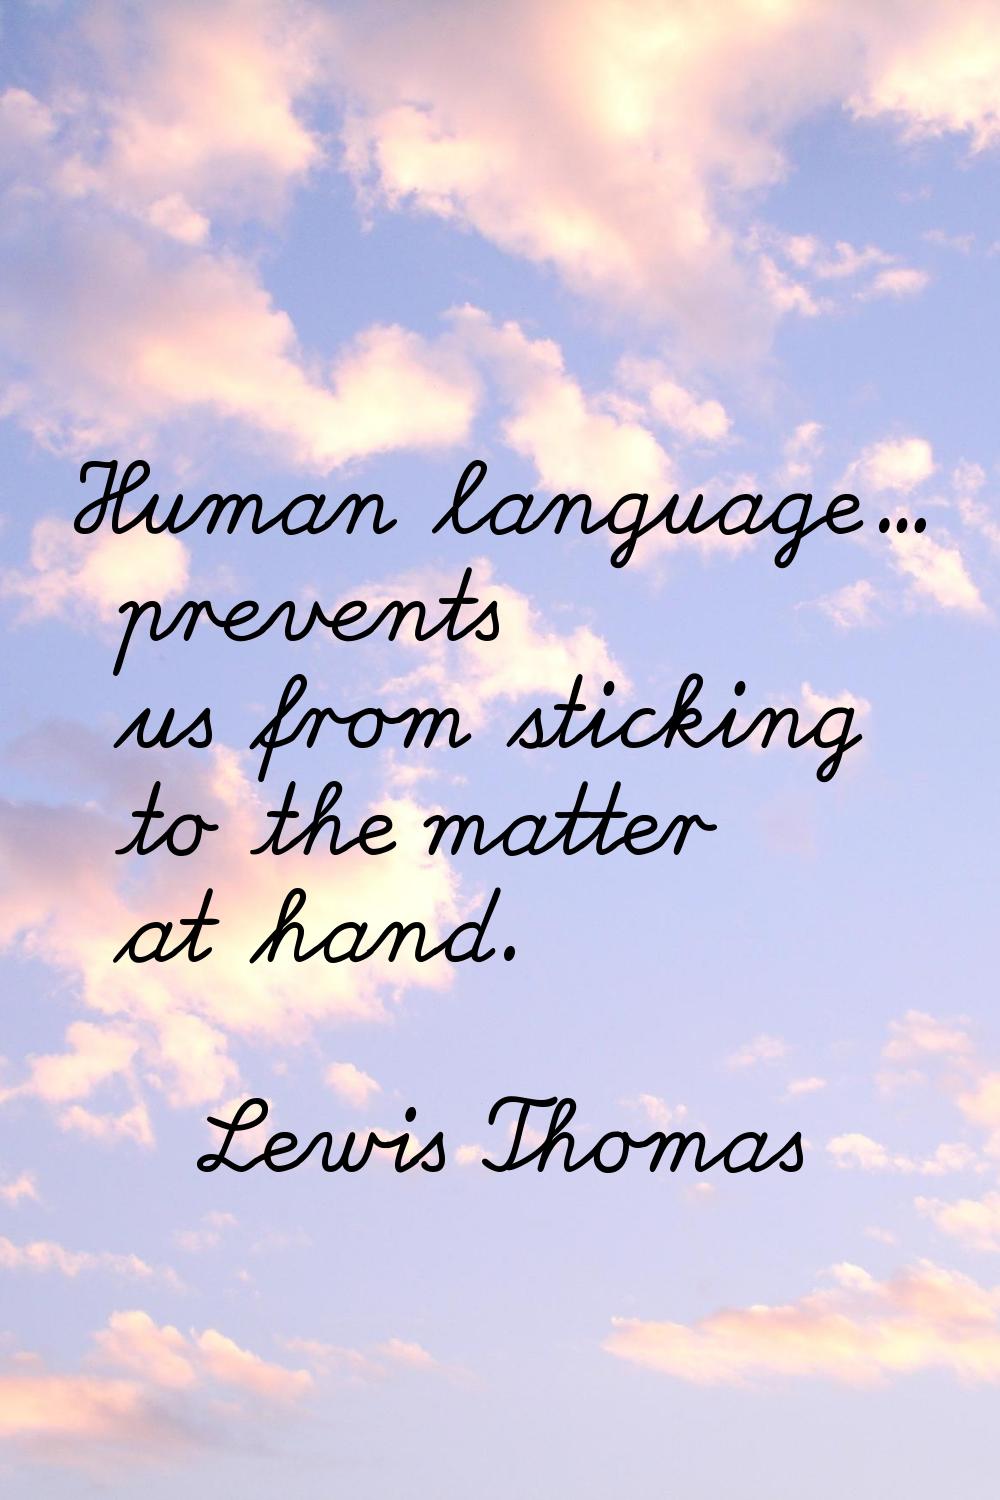 Human language... prevents us from sticking to the matter at hand.